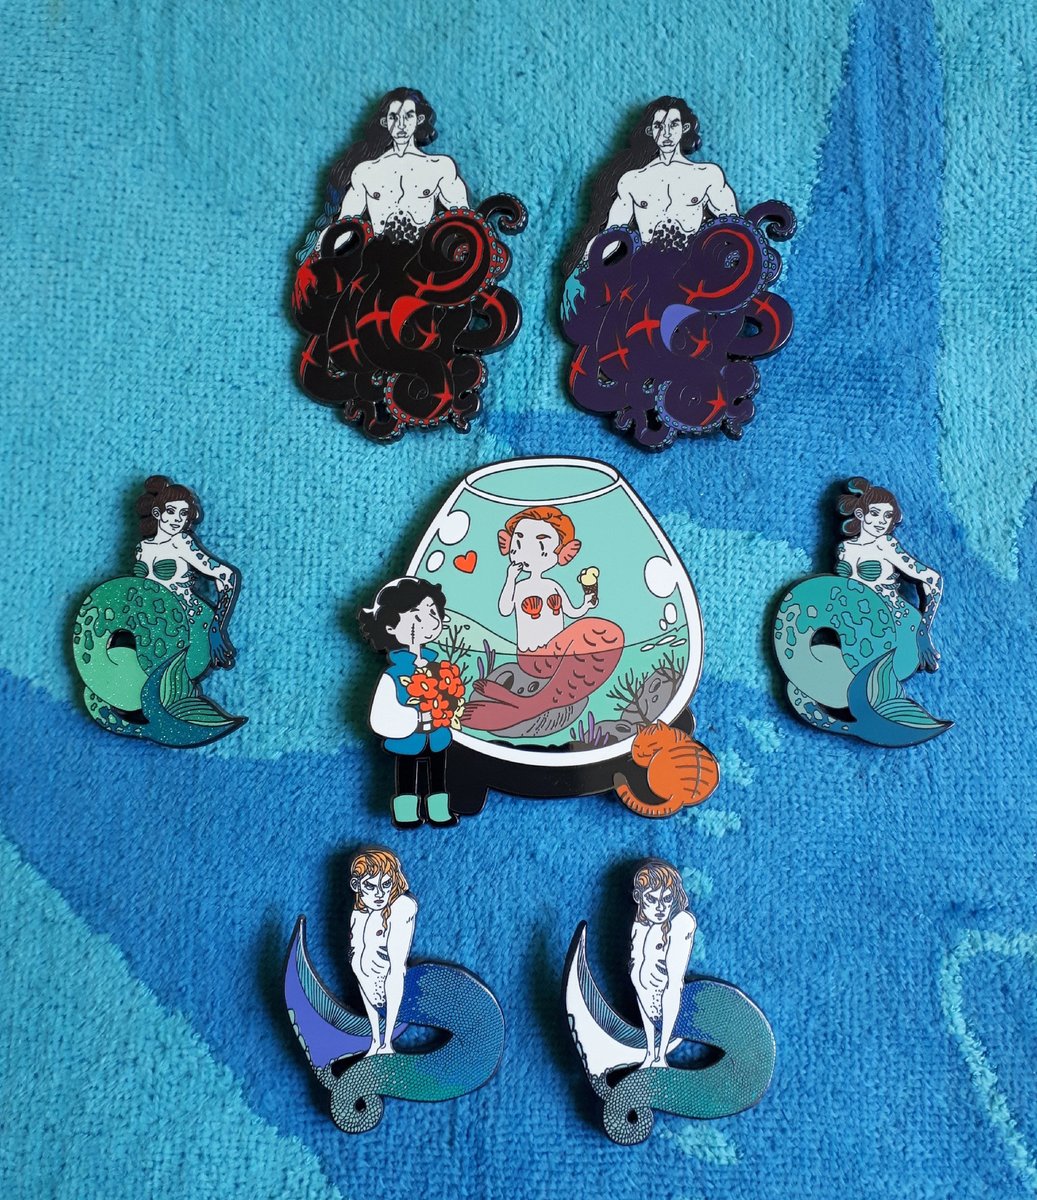 Mermaid-themed pins based on sketches by @aldoncanp and @tanlandebian from my collection))) #KyluxAU #mermay #mycollection